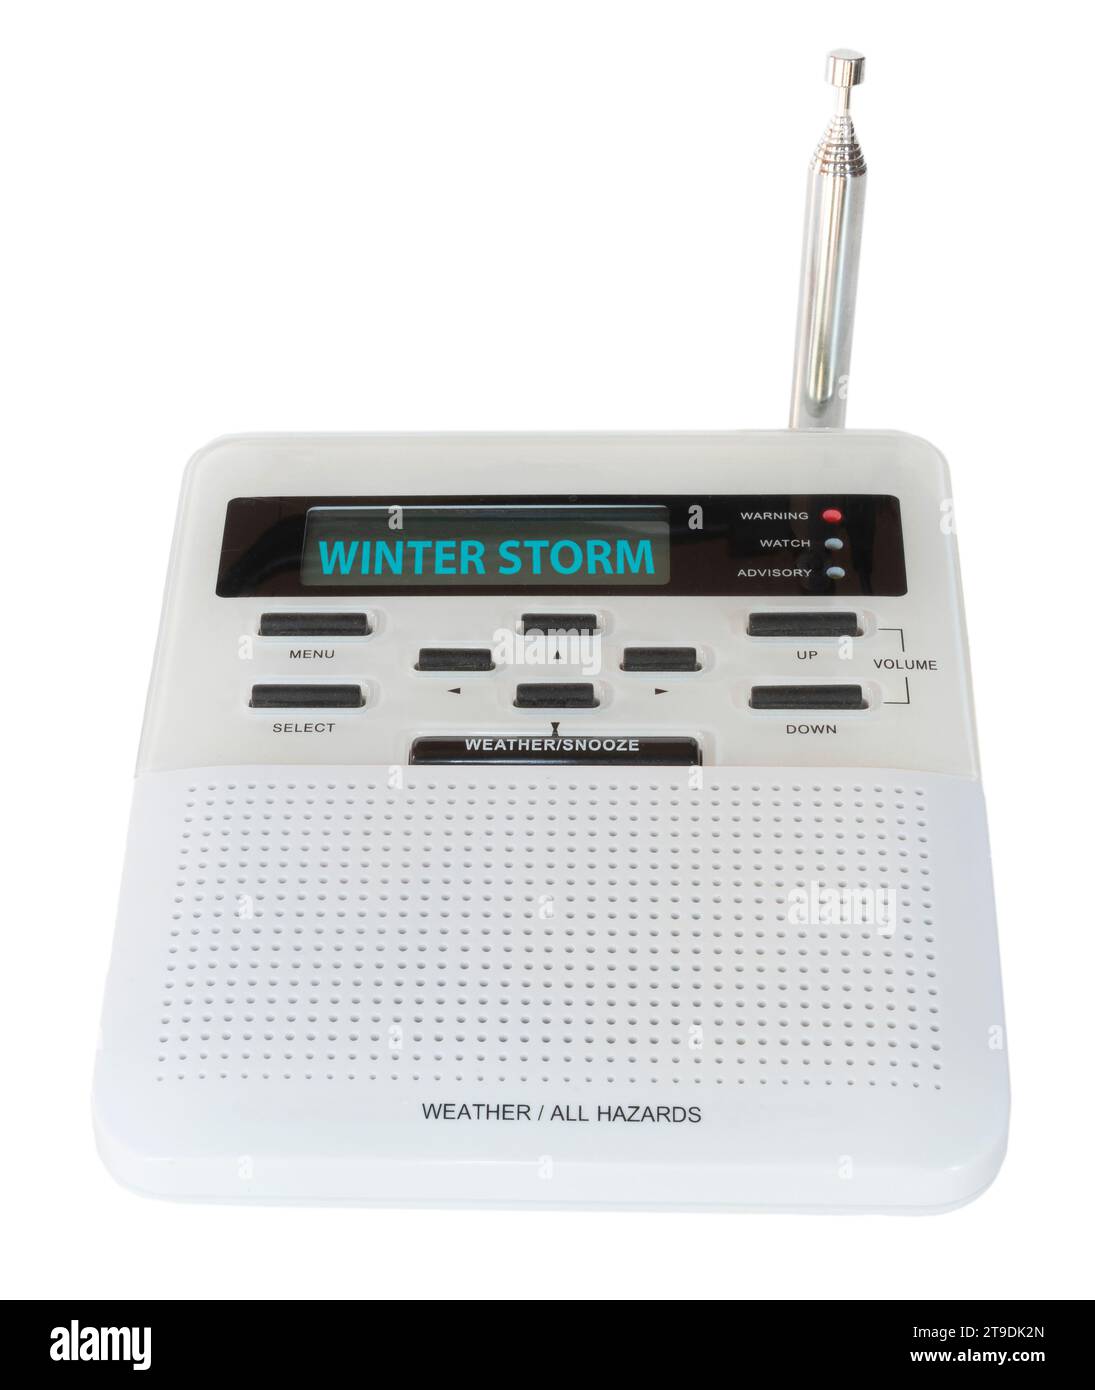 Digital weather and hazards radio that has received a signal and sounded the alarm and displaying the winter storm warning on its screen. Stock Photo